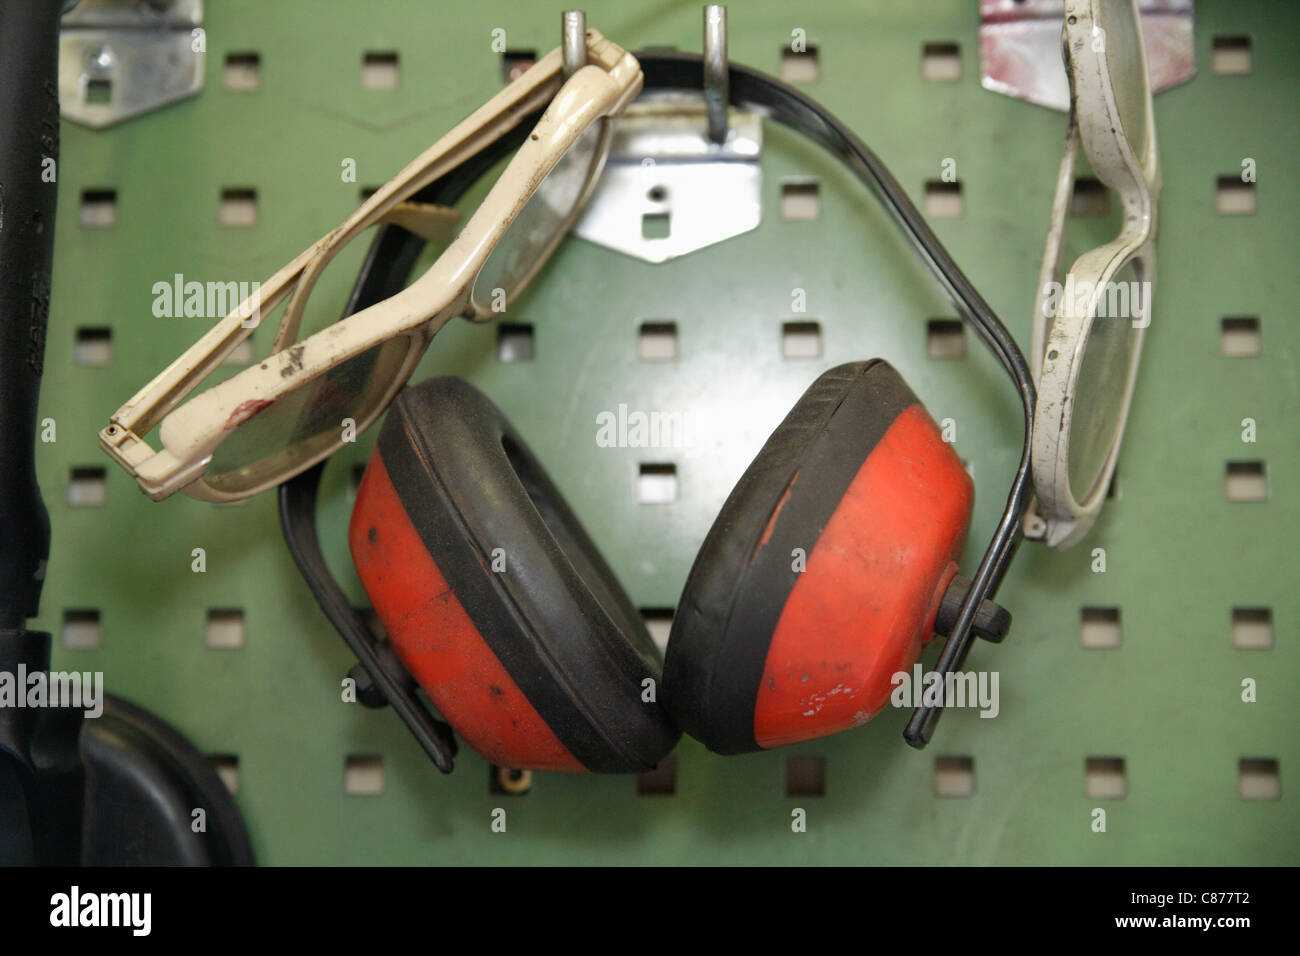 Germany, Ebenhausen, Close up of safety glasses and ear protectors on pegboard in repair garage Stock Photo